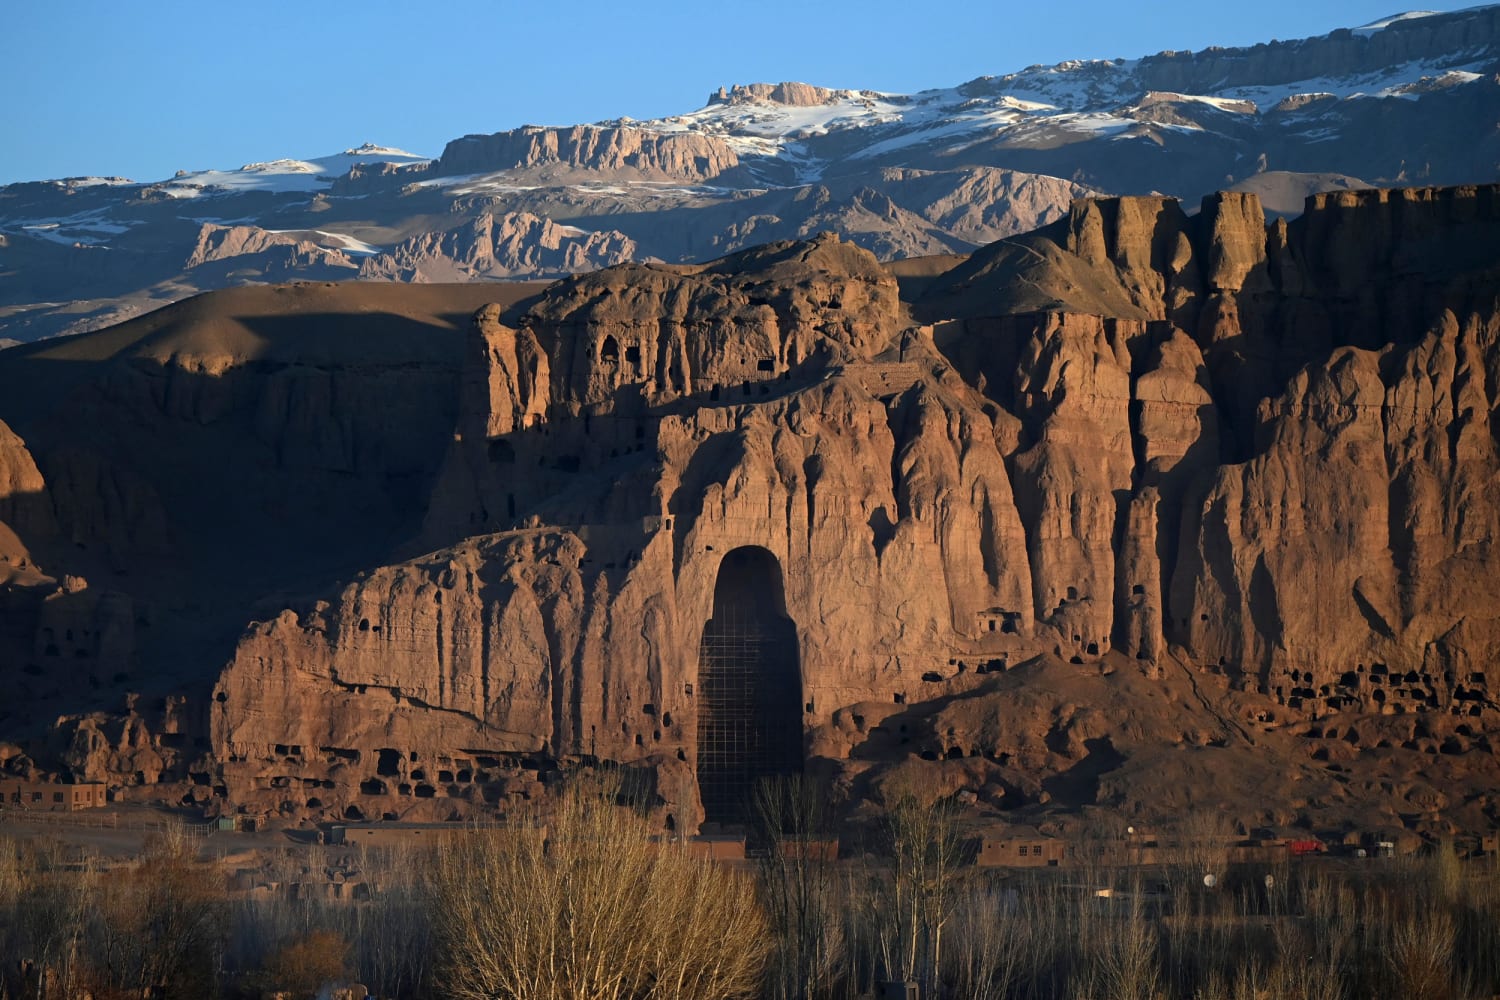 The Taliban destroyed these ancient Buddhas. Now they’re welcoming tourists to the site.